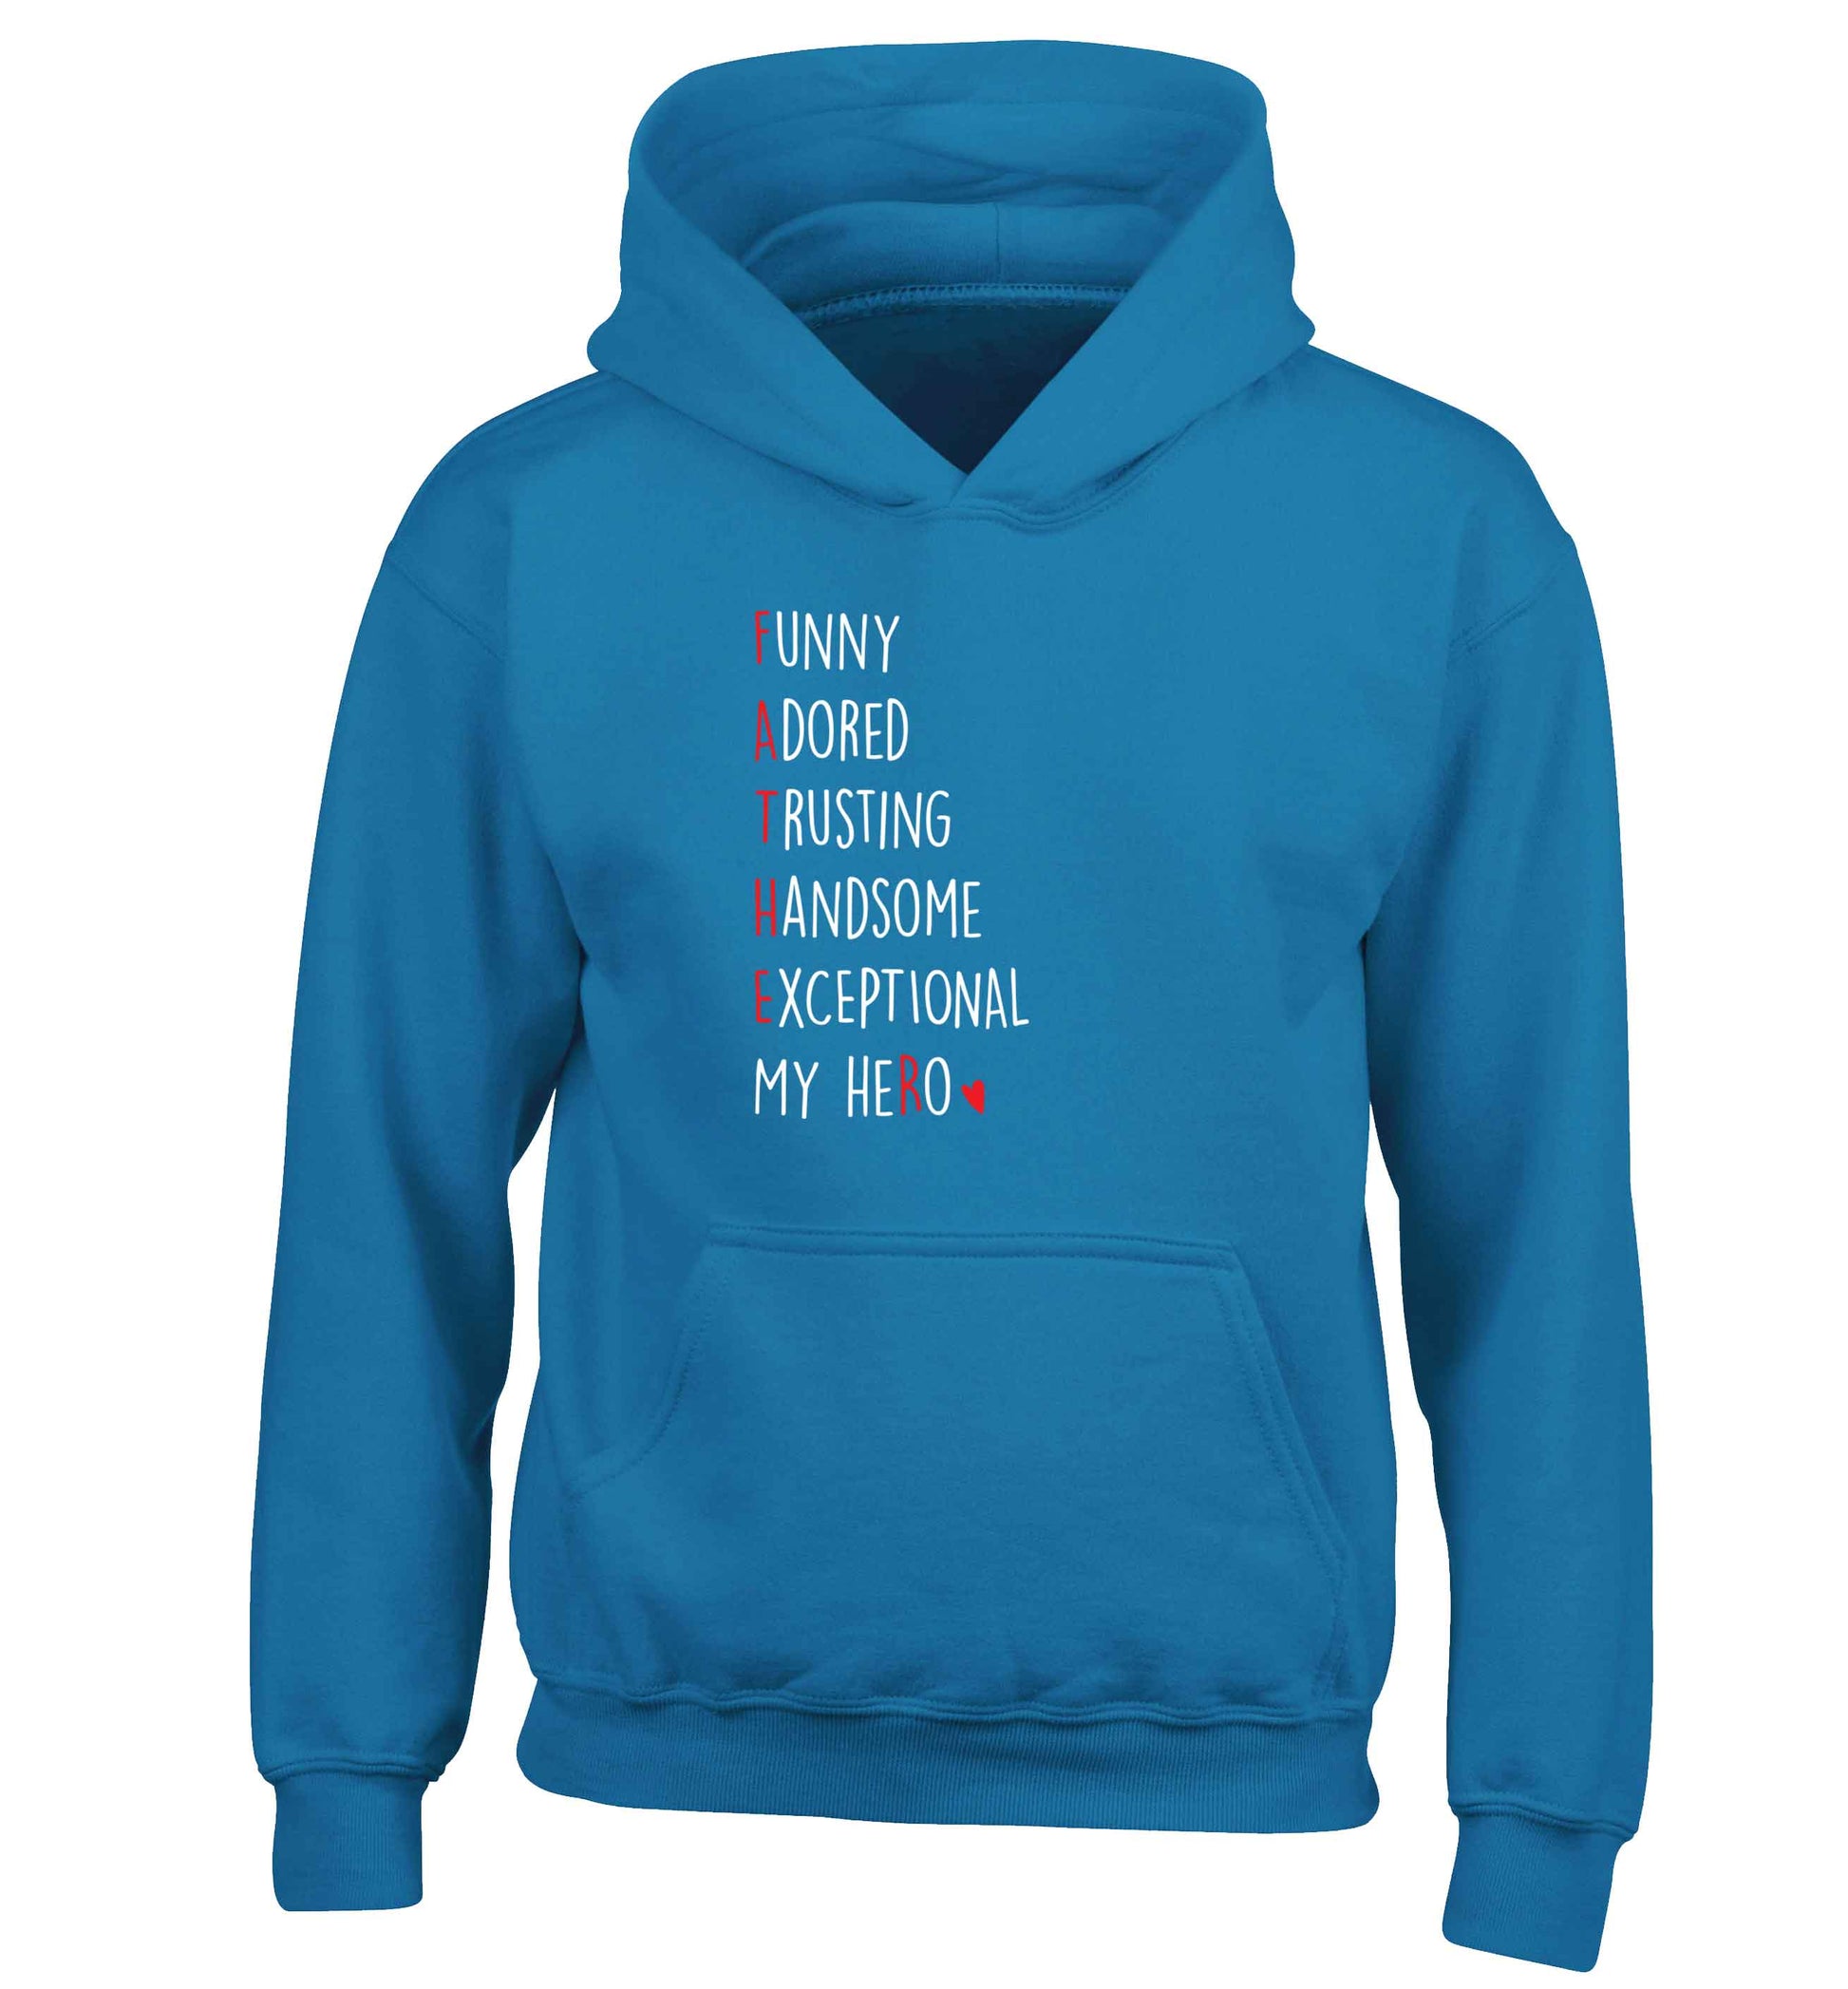 Father, funny adored trusting handsome exceptional my hero children's blue hoodie 12-13 Years